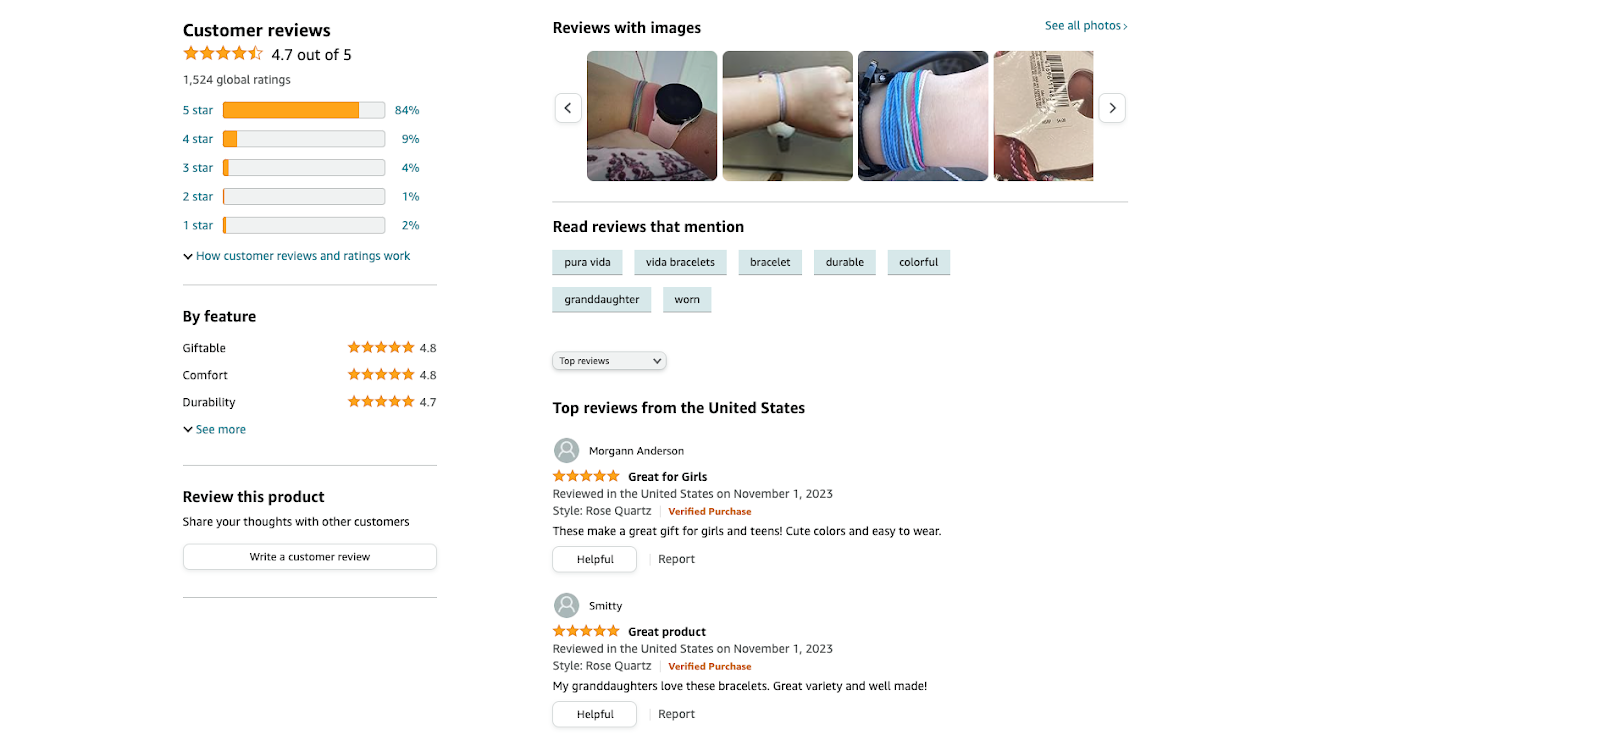 Customer reviews including pictures and five star ratings for Pure Vida bracelets on Amazon